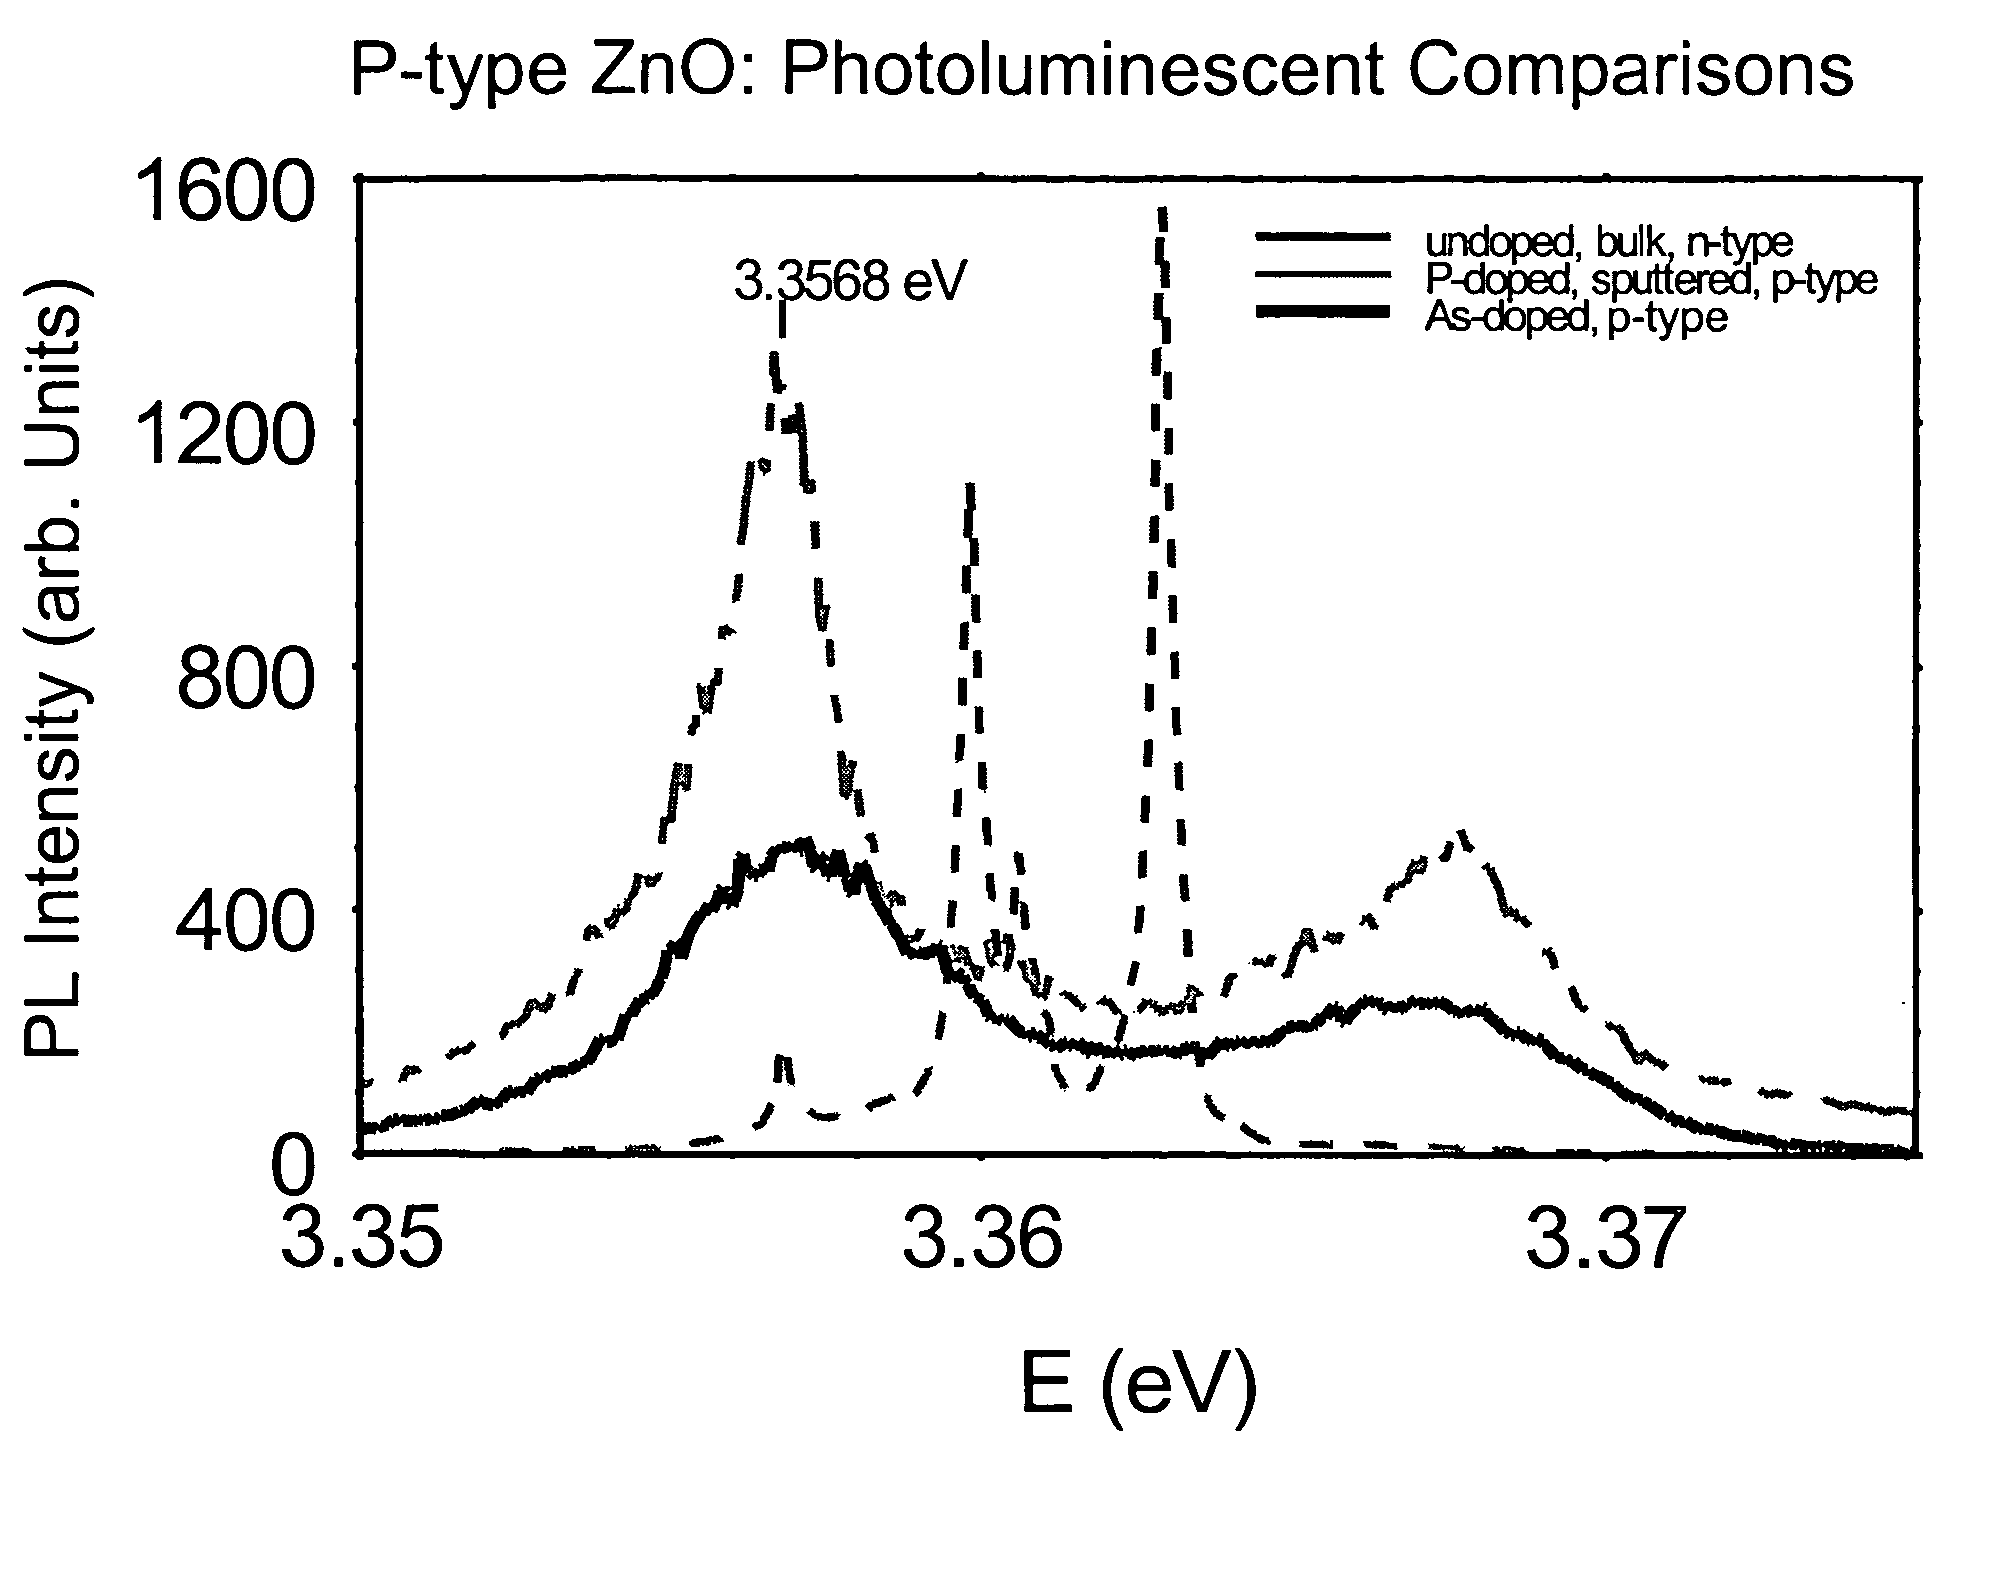 P-type group II-VI semiconductor compounds